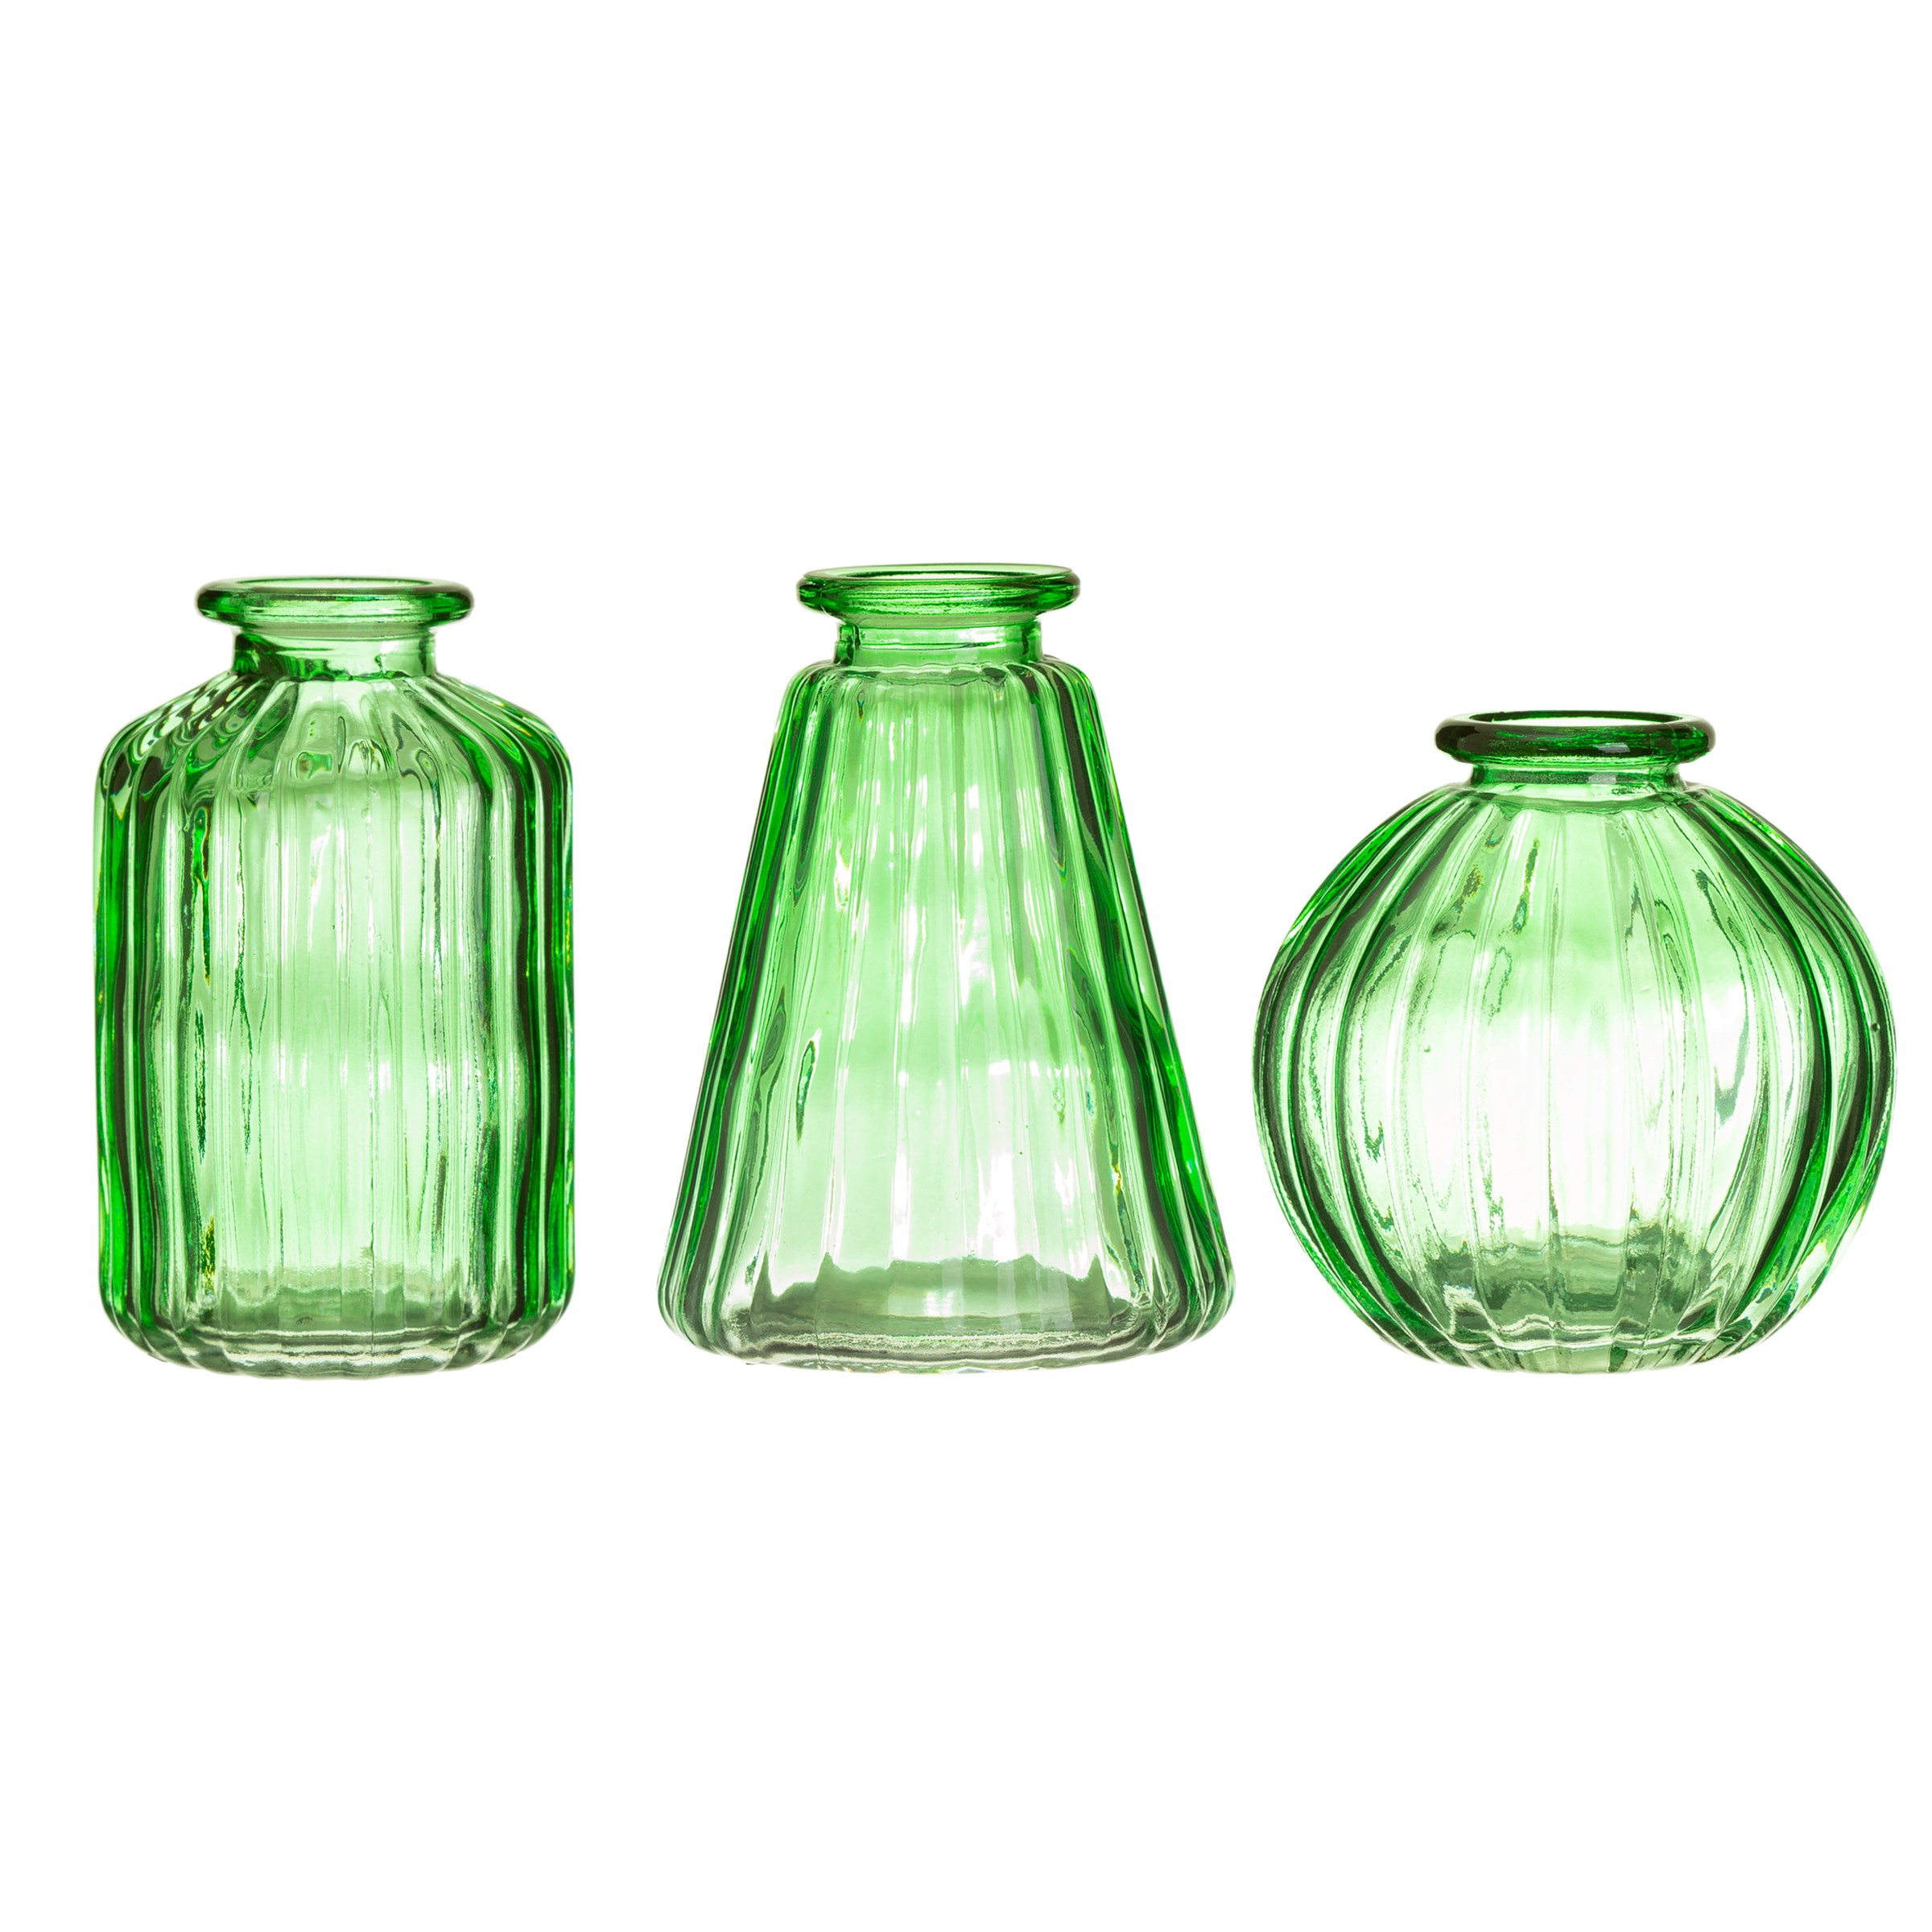 &Quirky Green Glass Bud Vases Set of 3